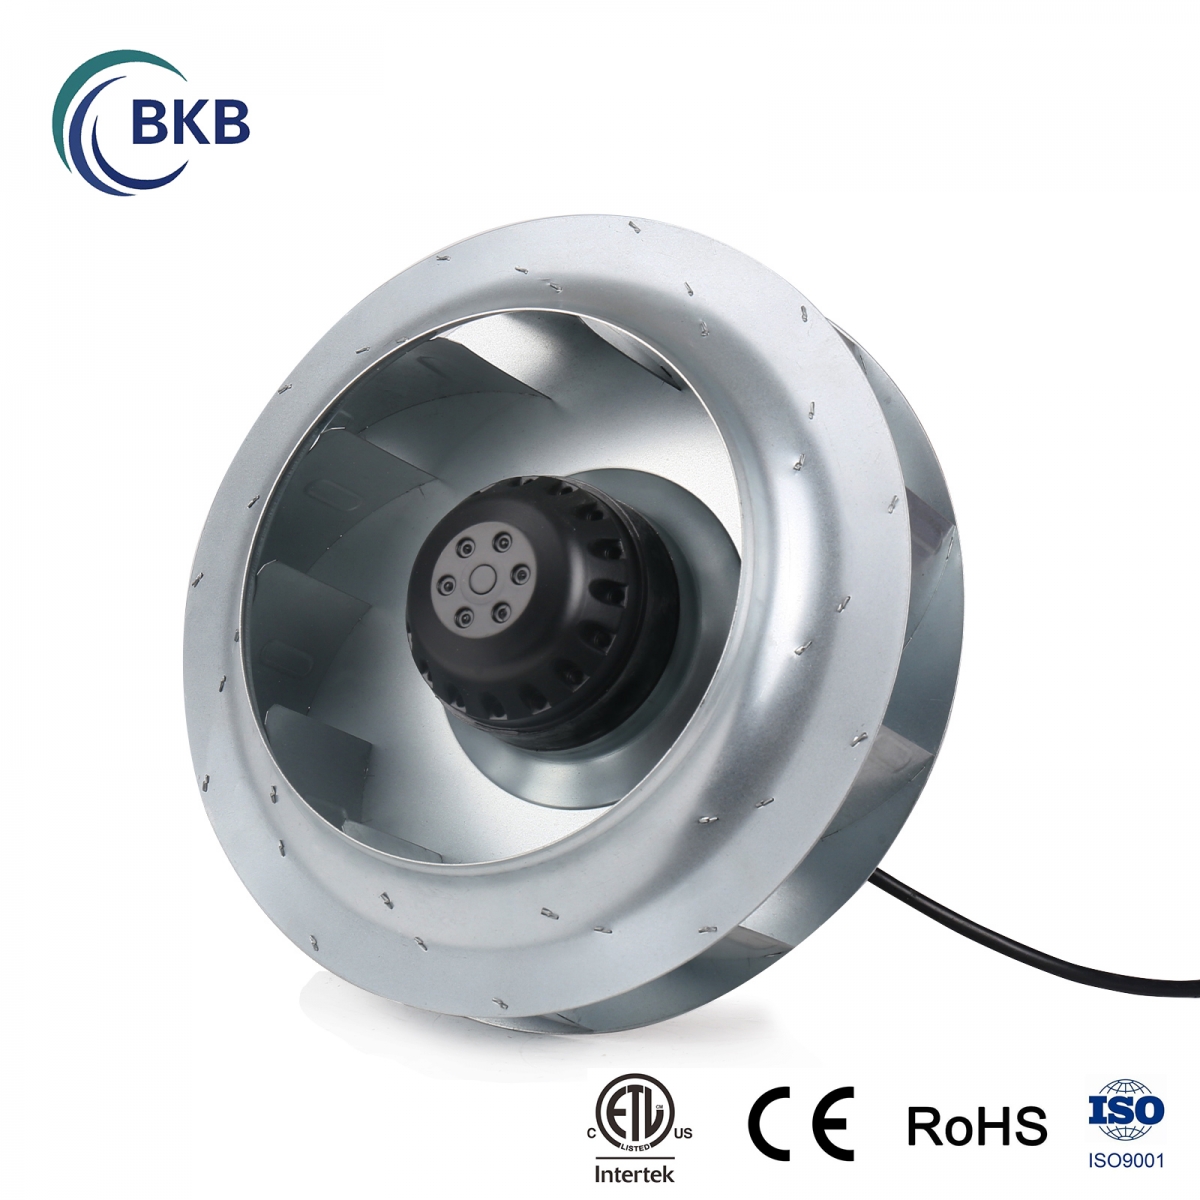 What is the purpose of centrifugal fan?-SUNLIGHT BLOWER,Centrifugal Fans, Inline Fans,Motors,Backward curved centrifugal fans ,Forward curved centrifugal fans ,inlet fans, EC fans